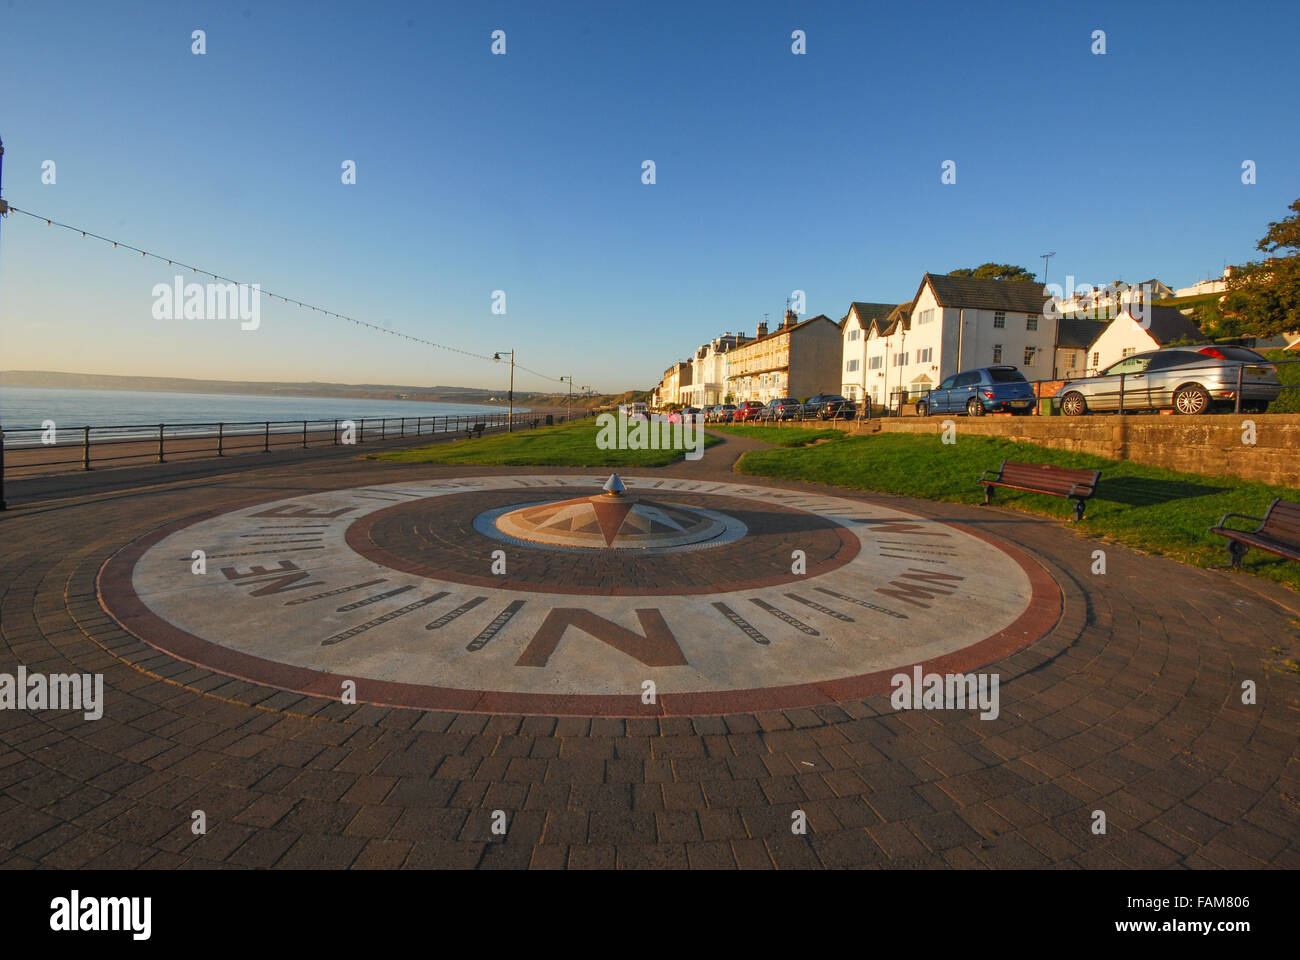 filey compass rose fountain Stock Photo